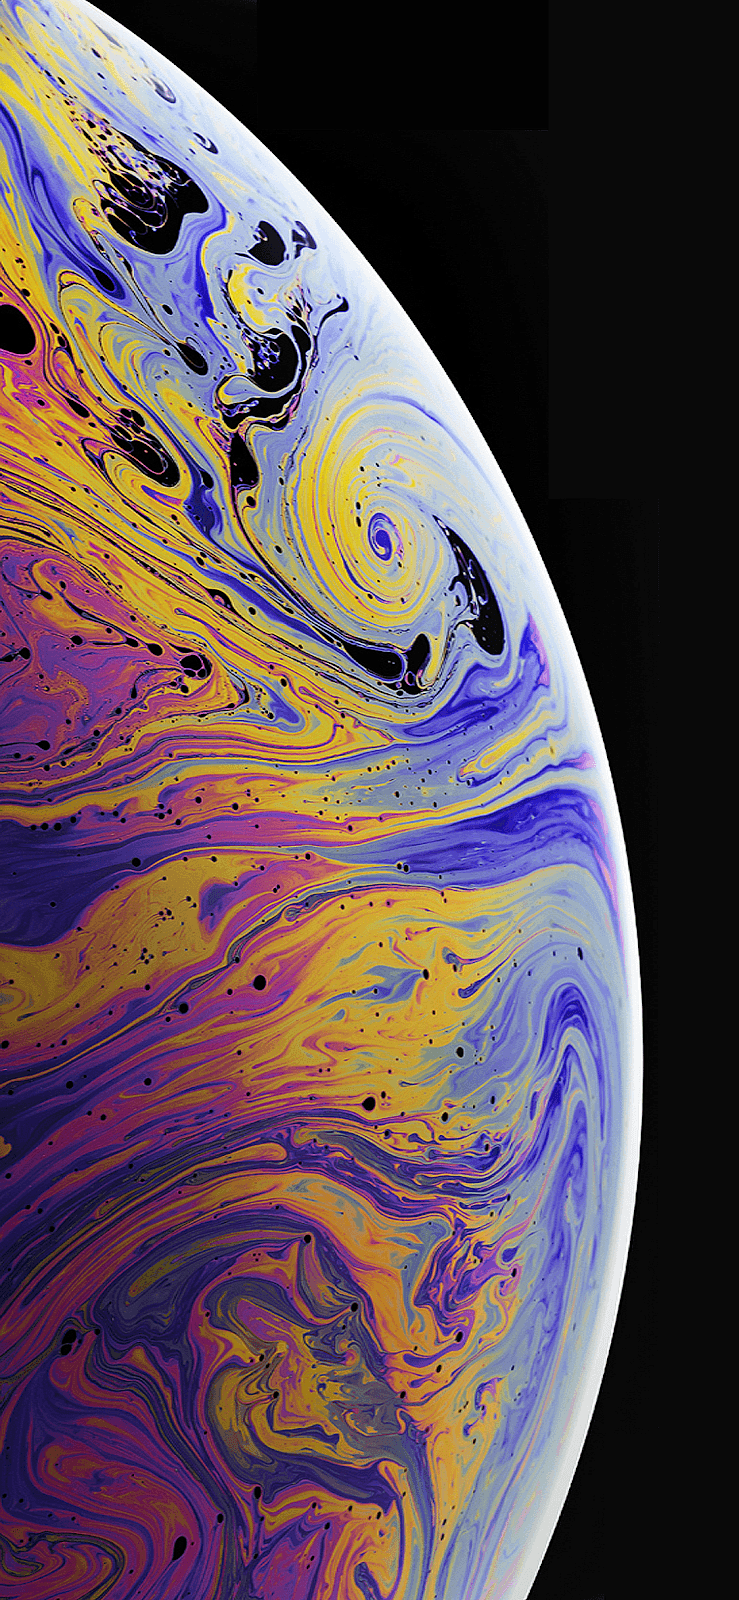 iPhone XS and XS Max Wallpaper in High Quality for Download